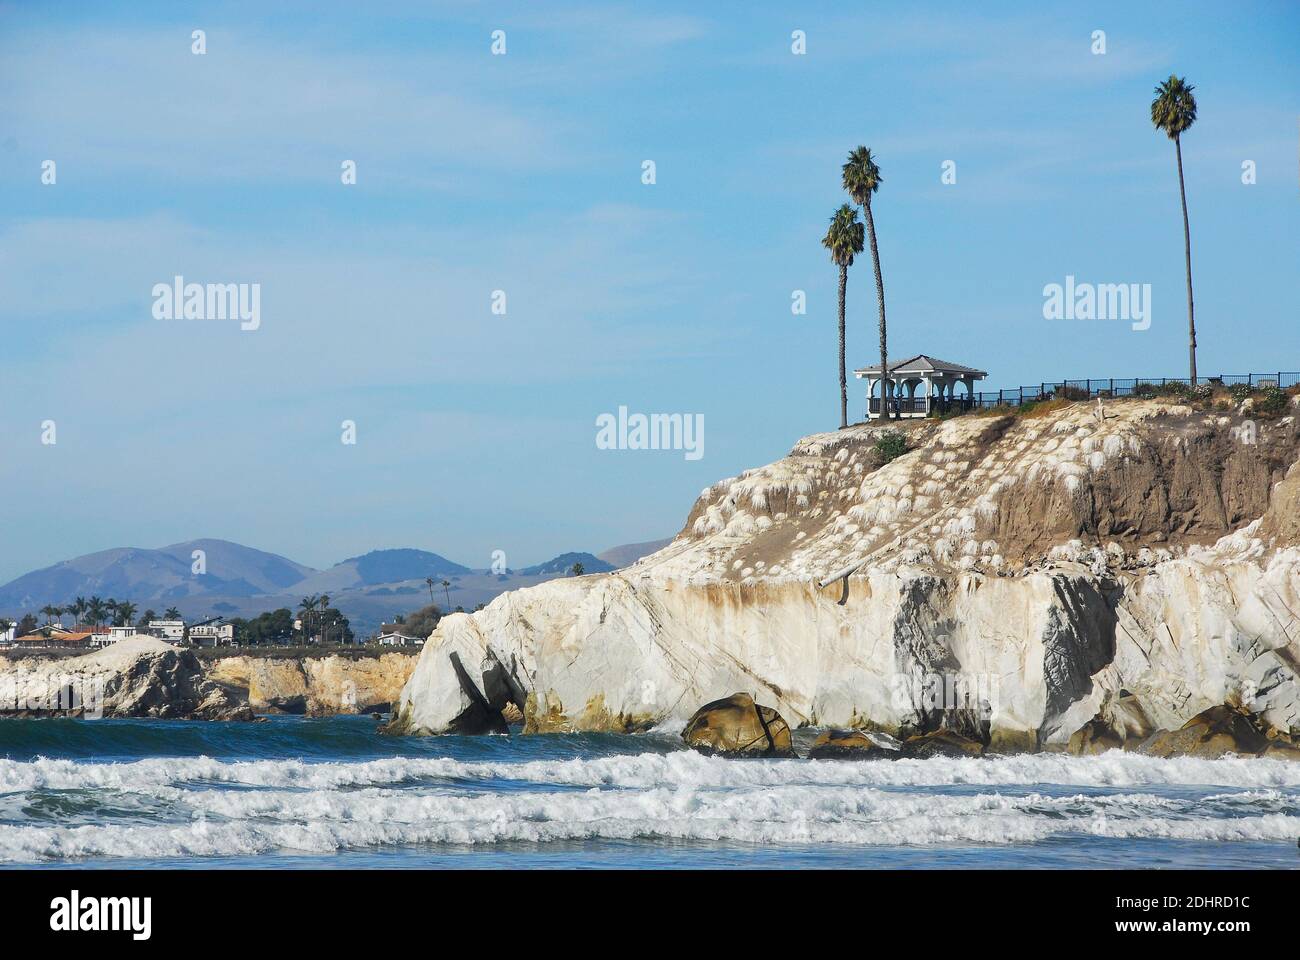 Clifftop hotel with palms and gazebo in Pismo Beach in San Luis Obispo County, California, famous for its Pismo Clams, beaches, and sand dunes. Stock Photo